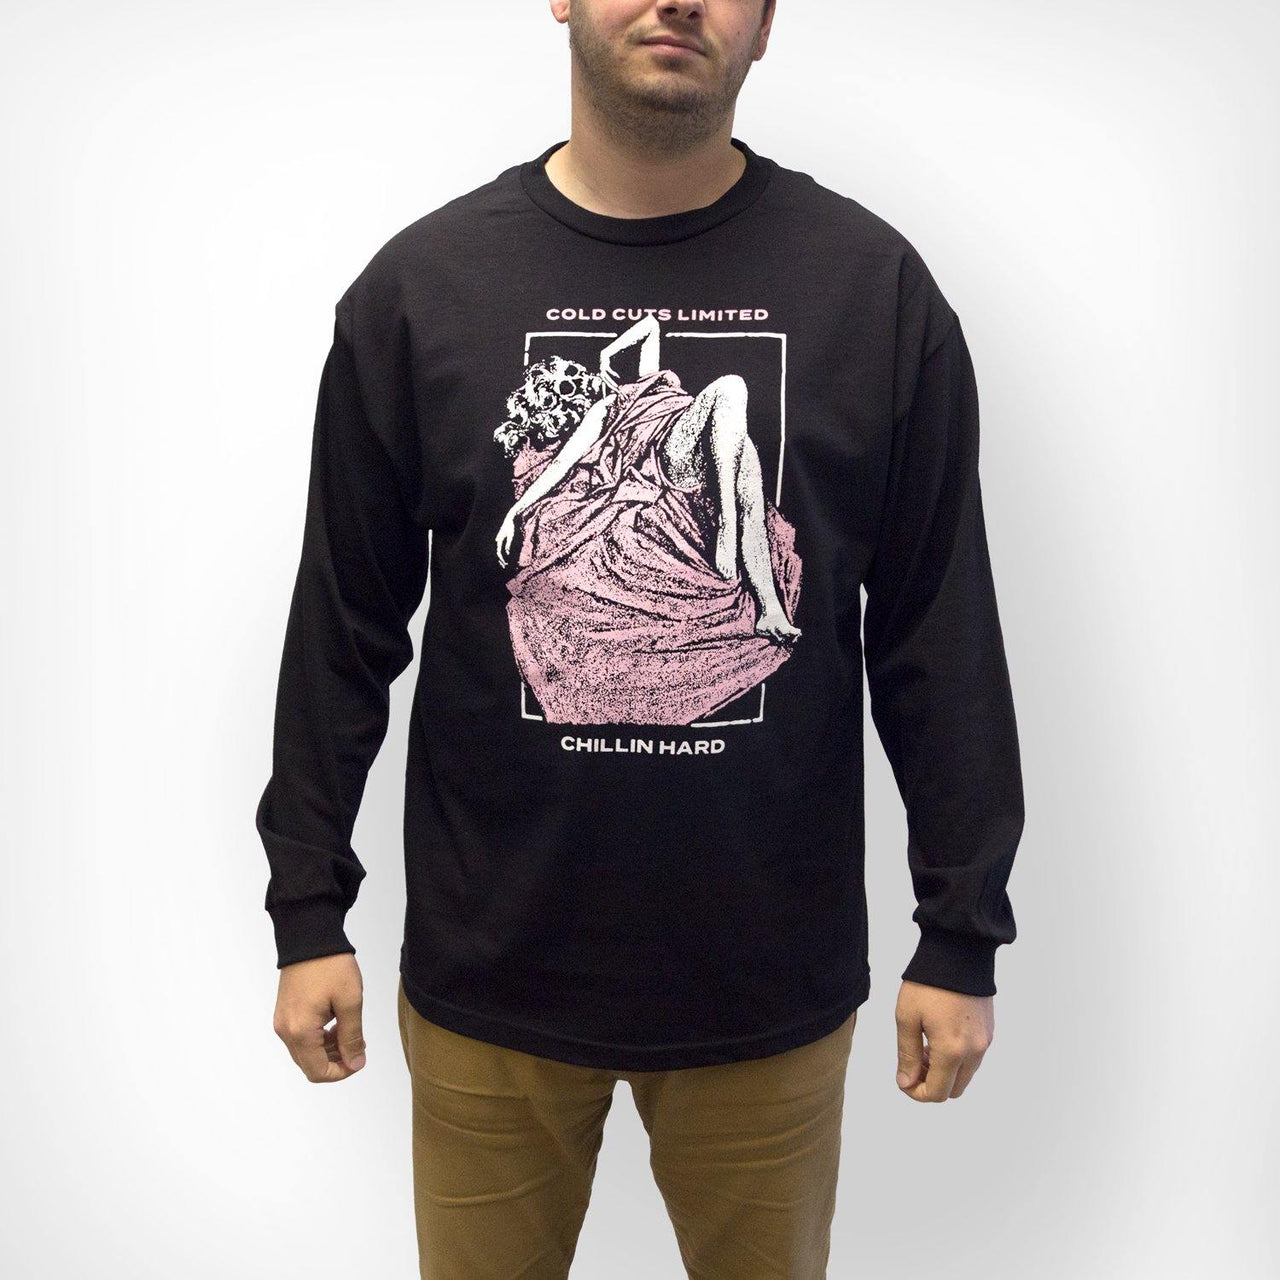 Buy – Cold Cuts Limited "Chillin Hard" Long Sleeve – Band & Music Merch – Cold Cuts Merch